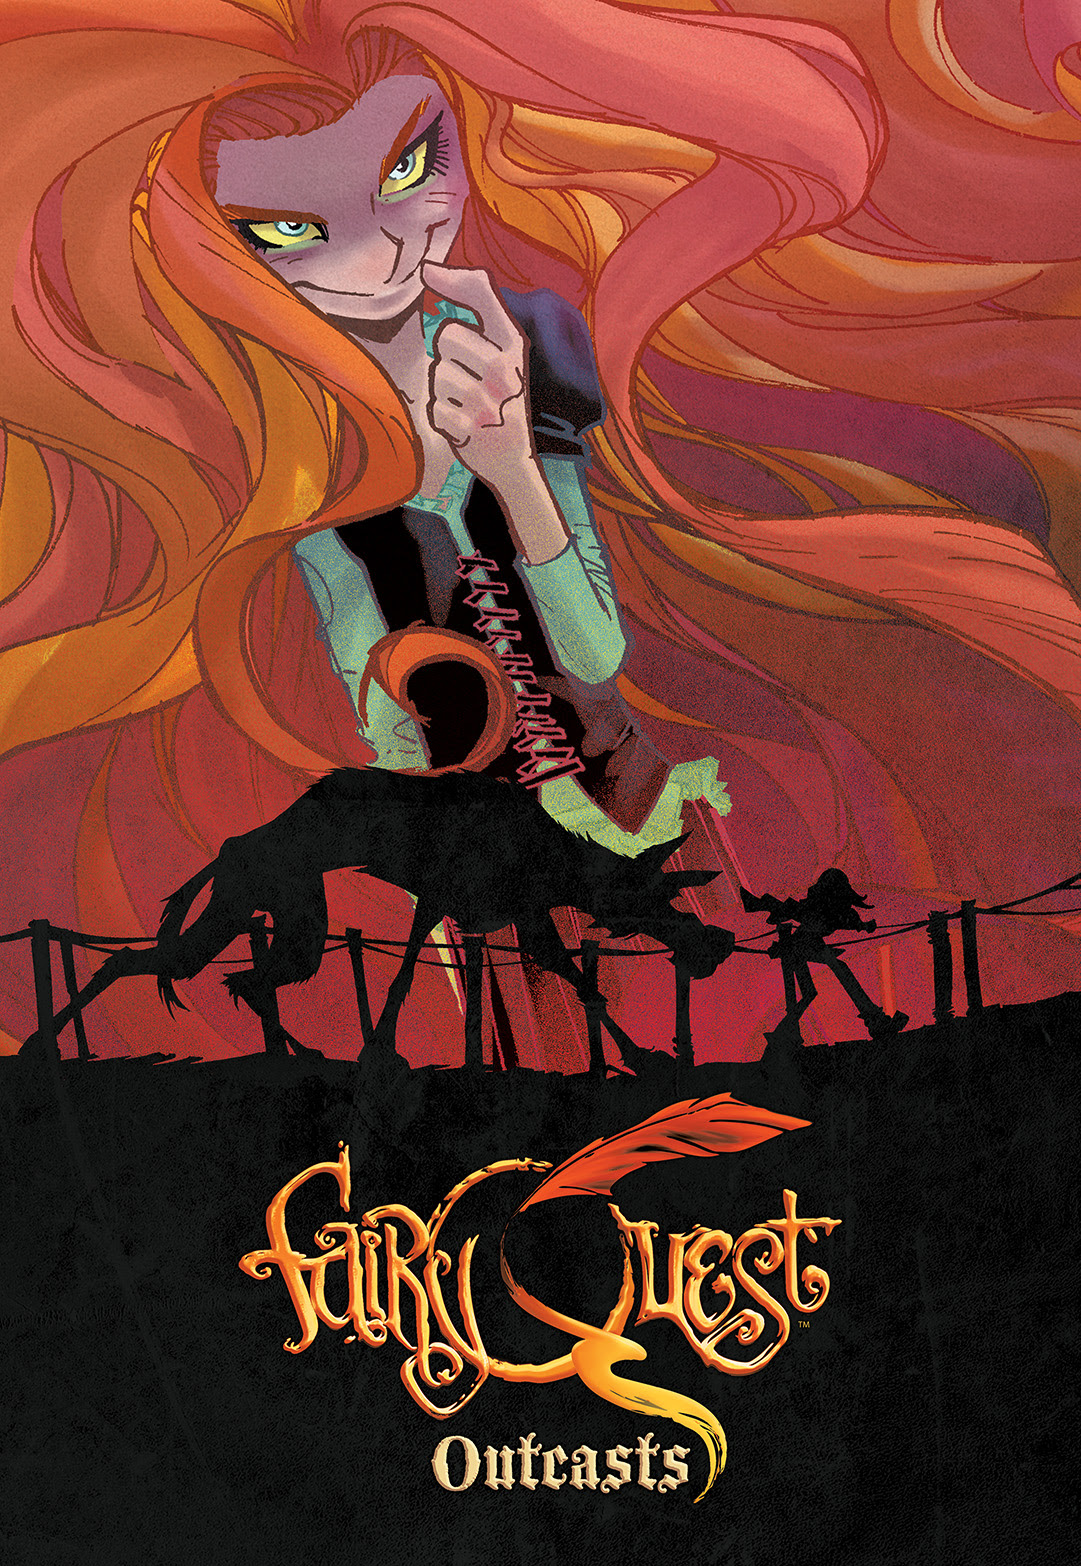 FAIRY QUEST: OUTCASTS #2 Cover by Humberto Ramos